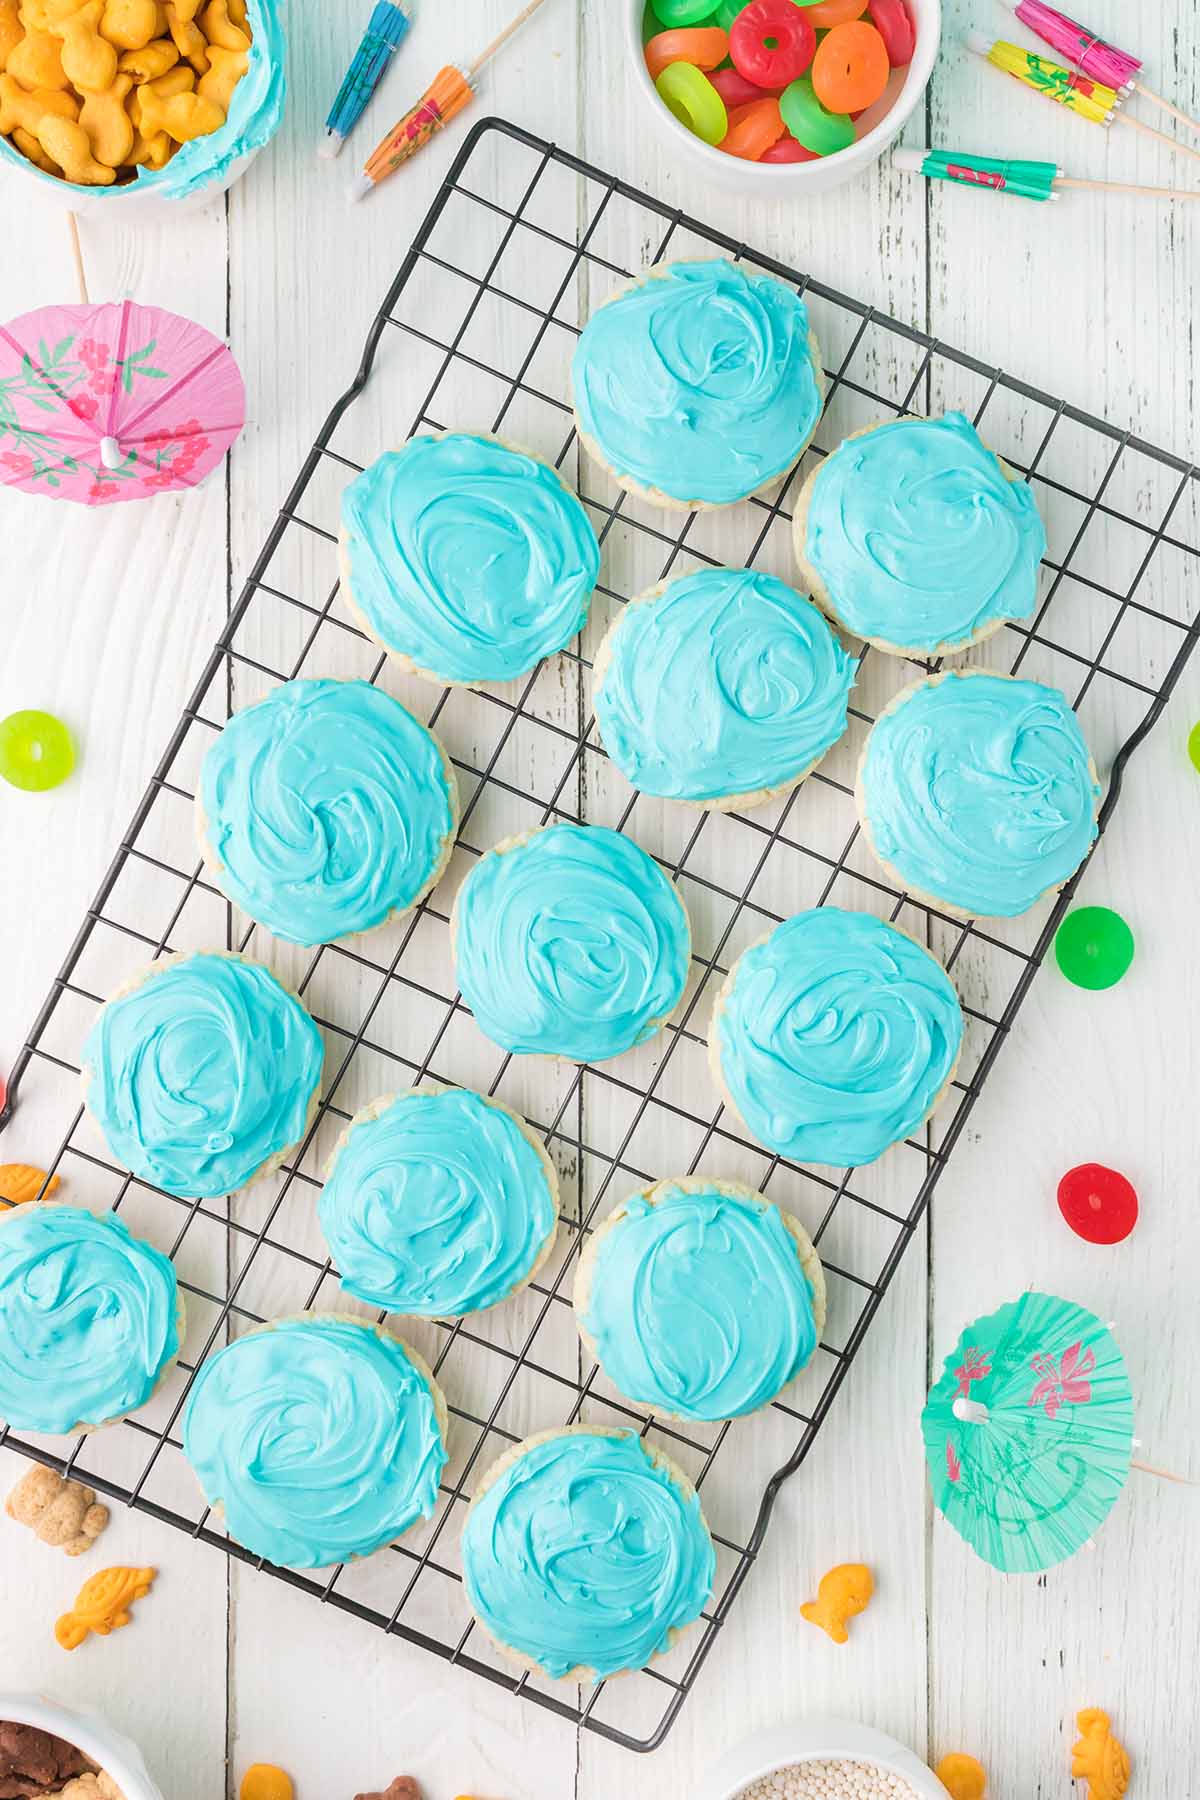 A cooling rack topped with blue frosted cookies.